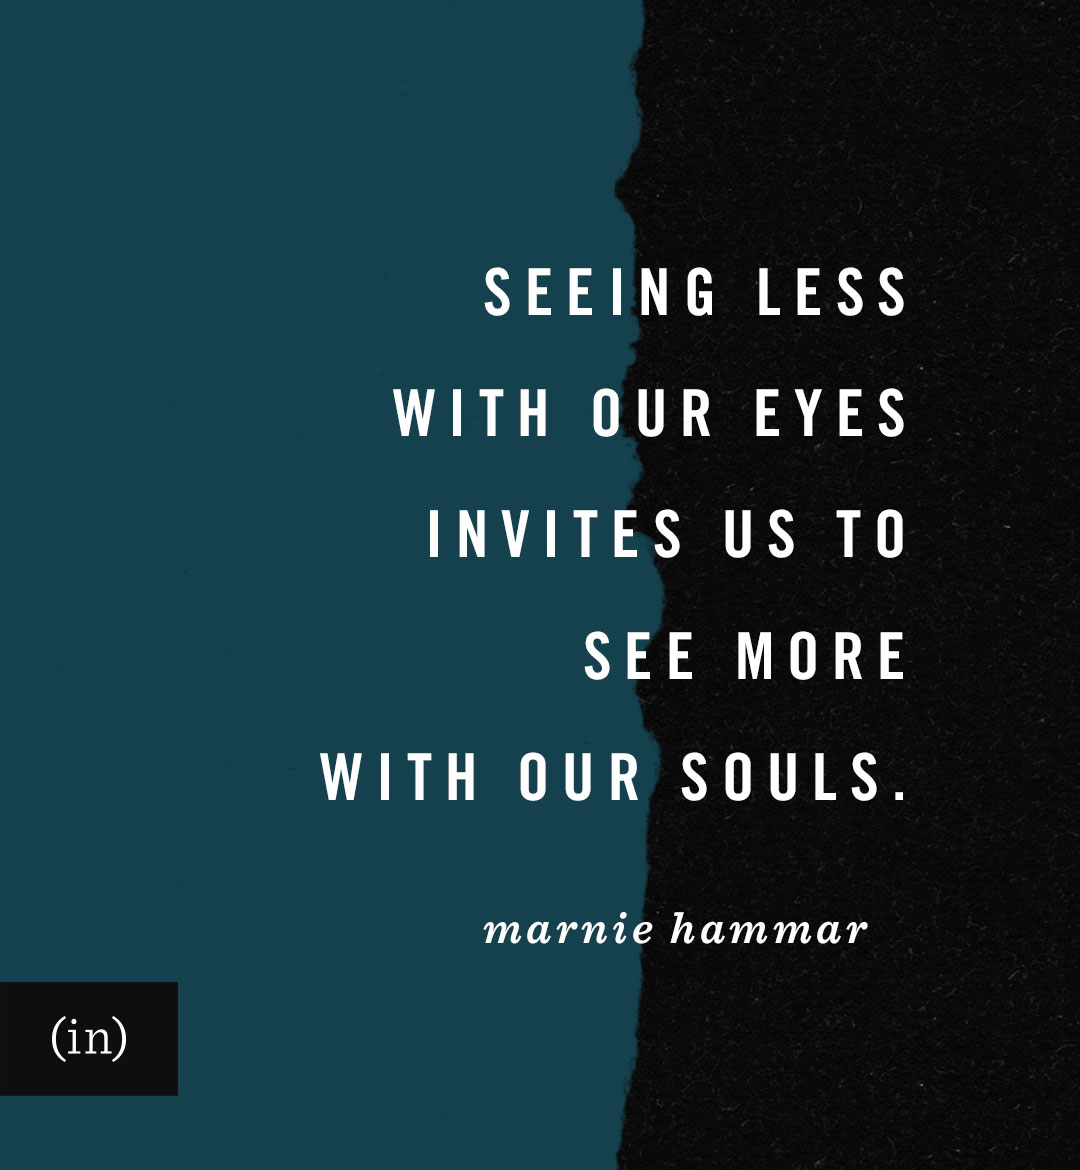 Seeing less with our eyes invites us to see more with our souls. -Marnie Hammar